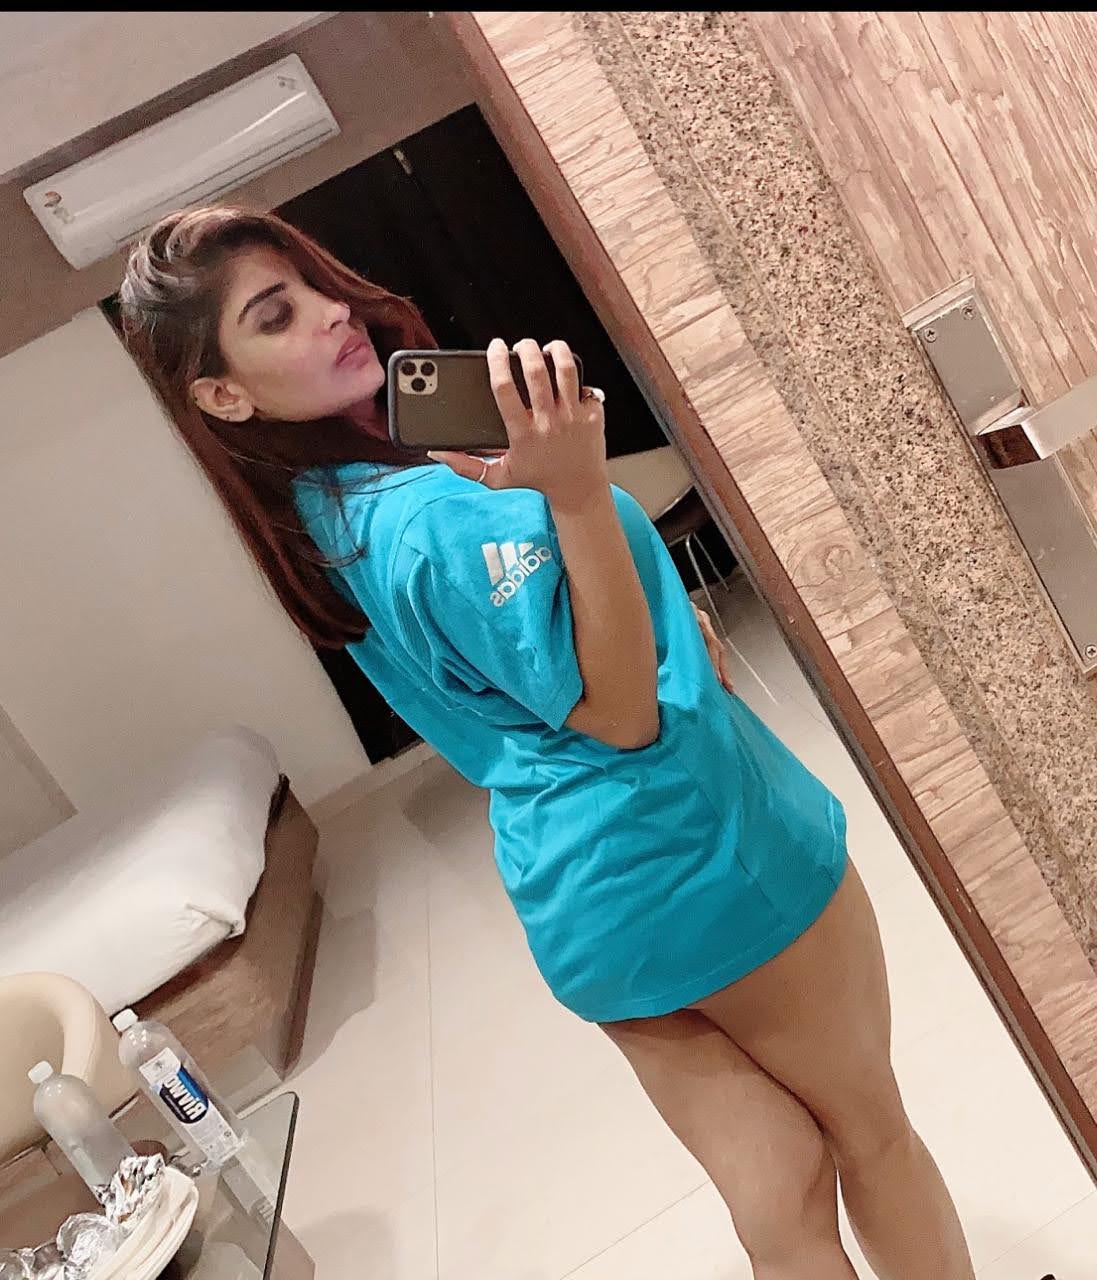 Pimpri chinchwad vip high profile college girl house wife available